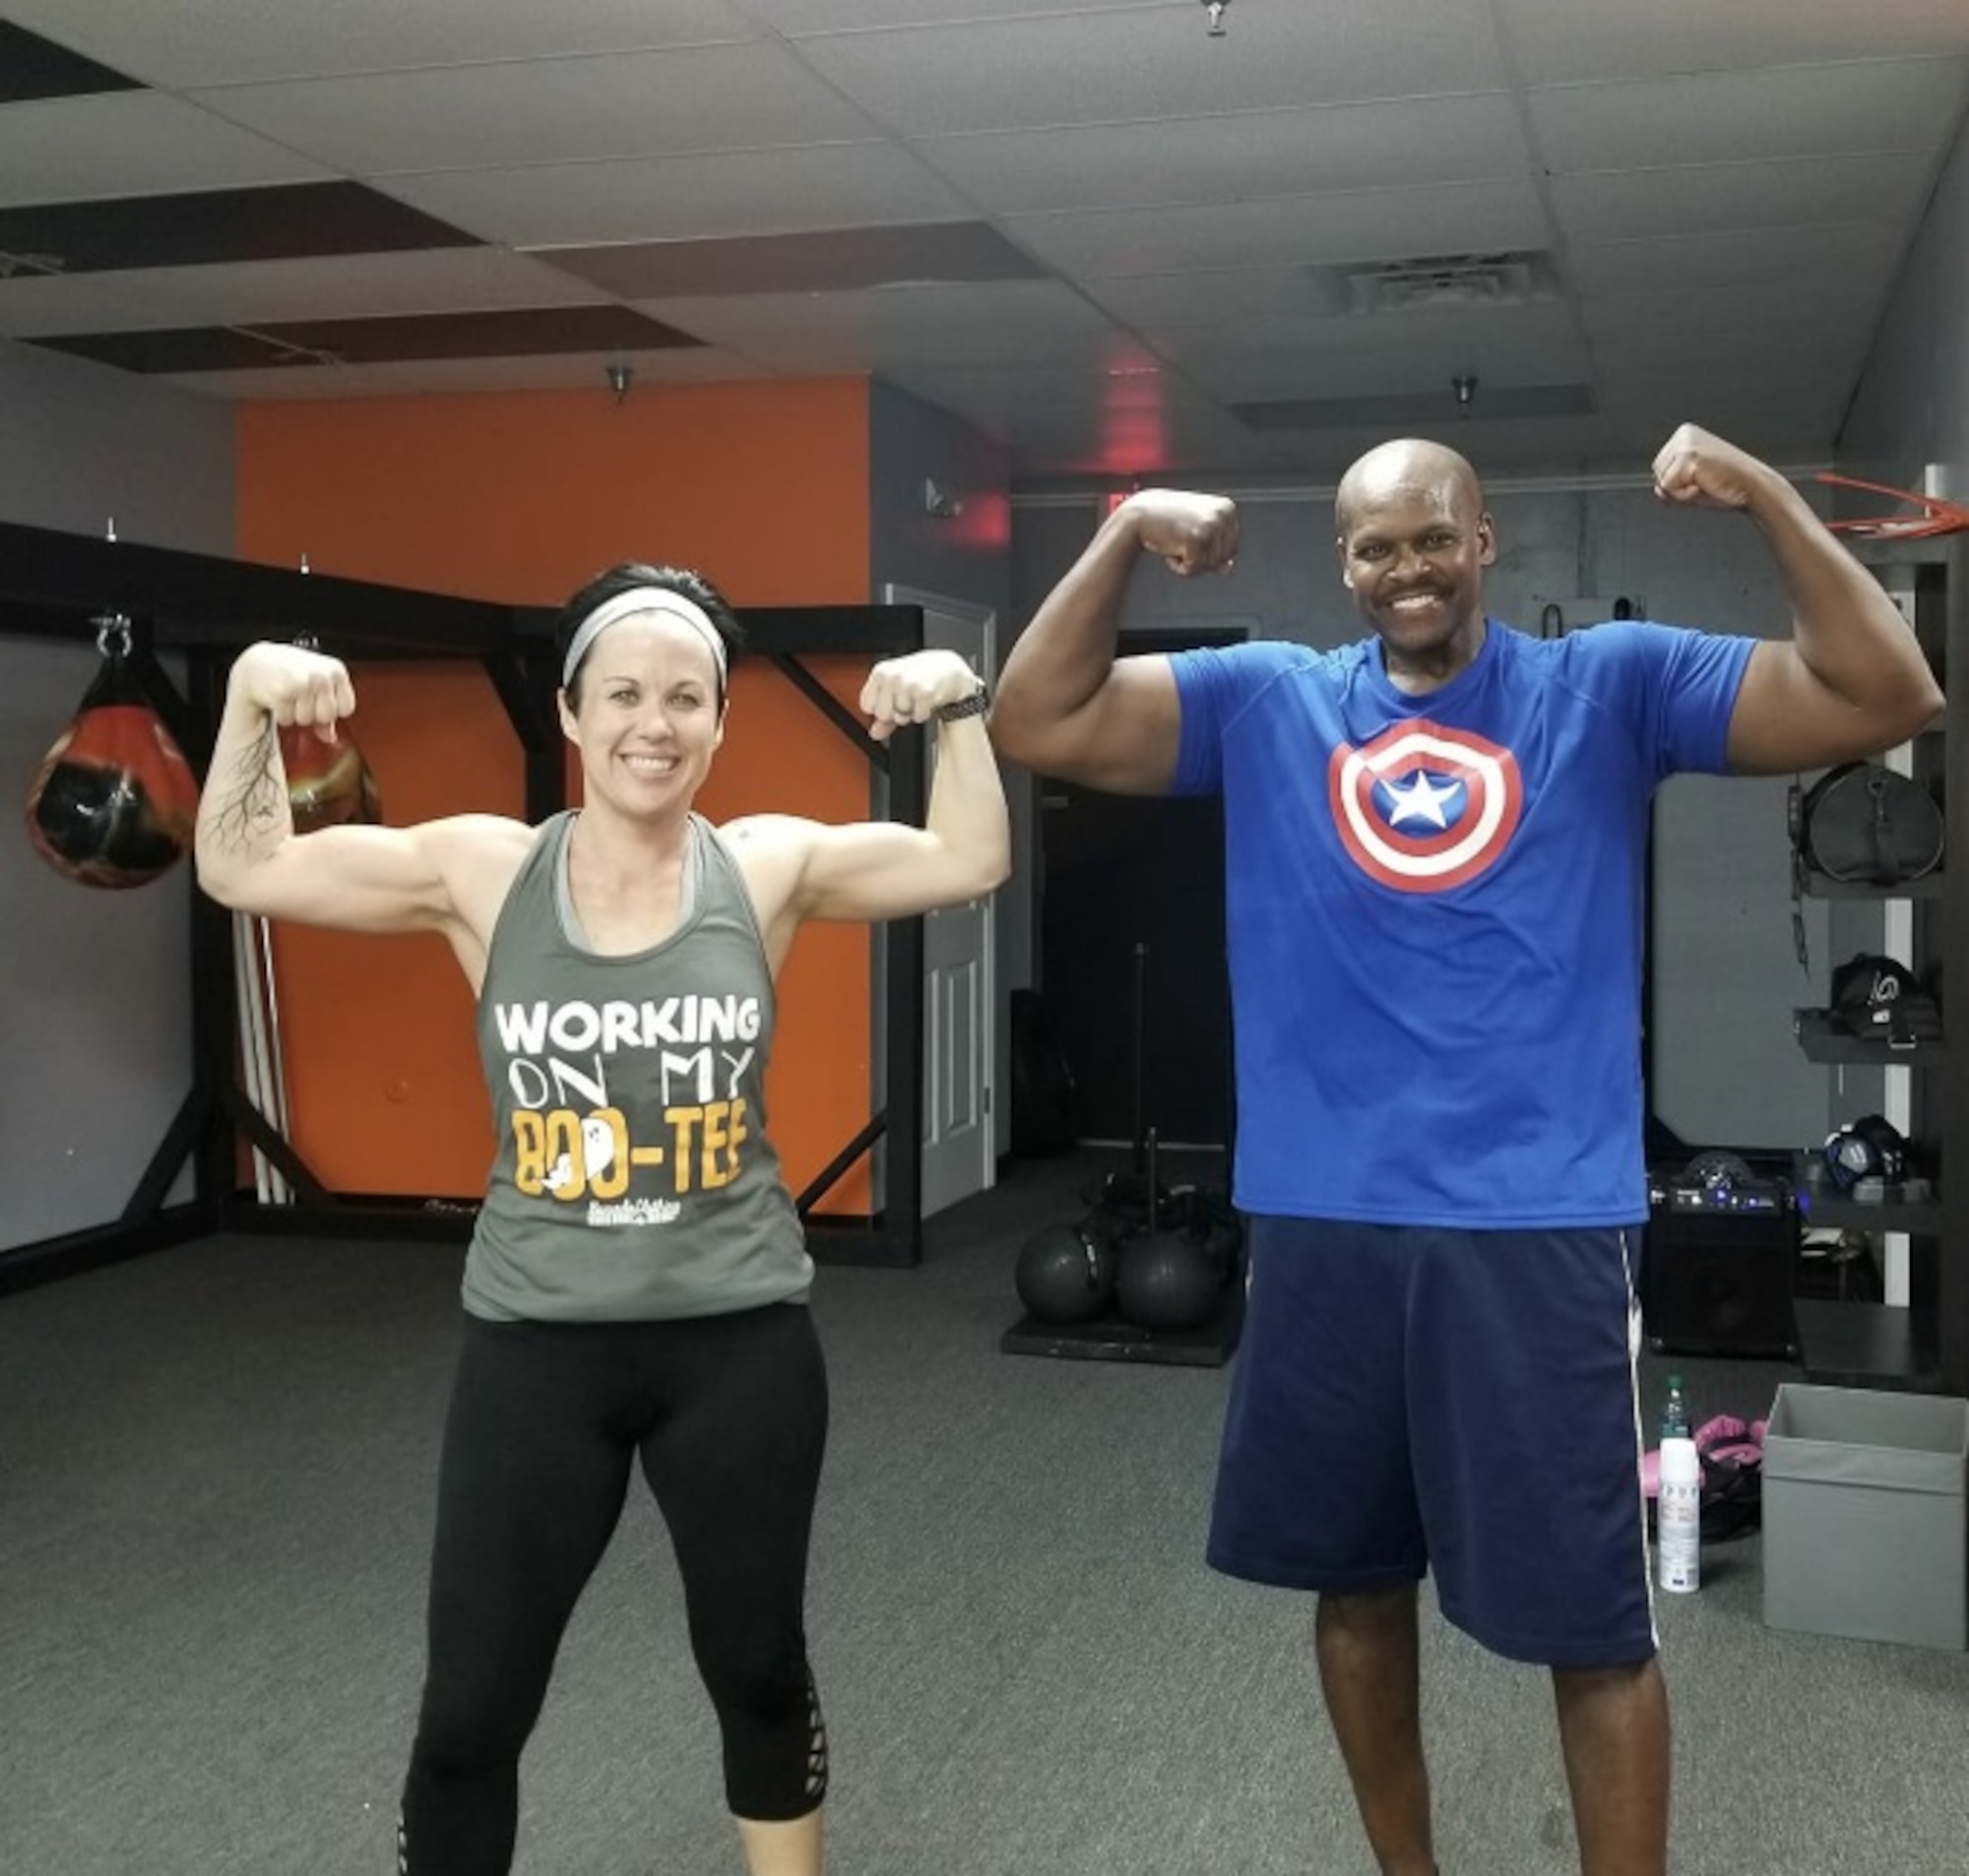 Retired Master Sgt. and financial management specialist Daryl McFadden, flexes with one of his fitness partners, Christina Millard, after a workout.  McFadden, who has survived cancer twice and undergone a triple bypass surgery, makes his health his number one priority by continuing to exercise and changing his eating habits. (Courtesy photo)